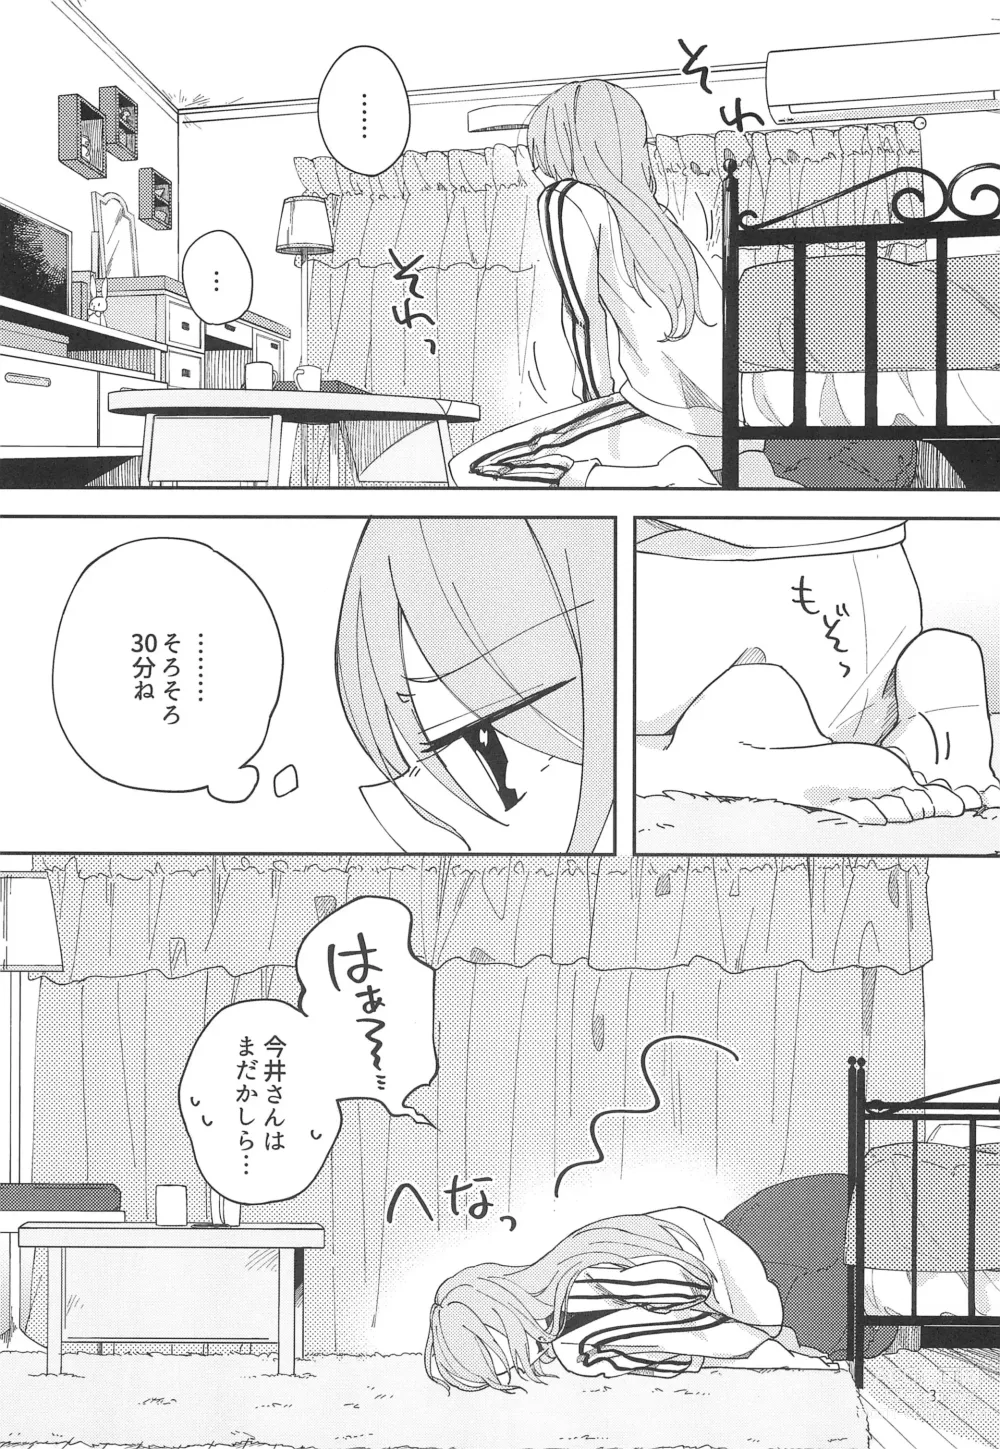 Page 5 of doujinshi I’m crazy about you.